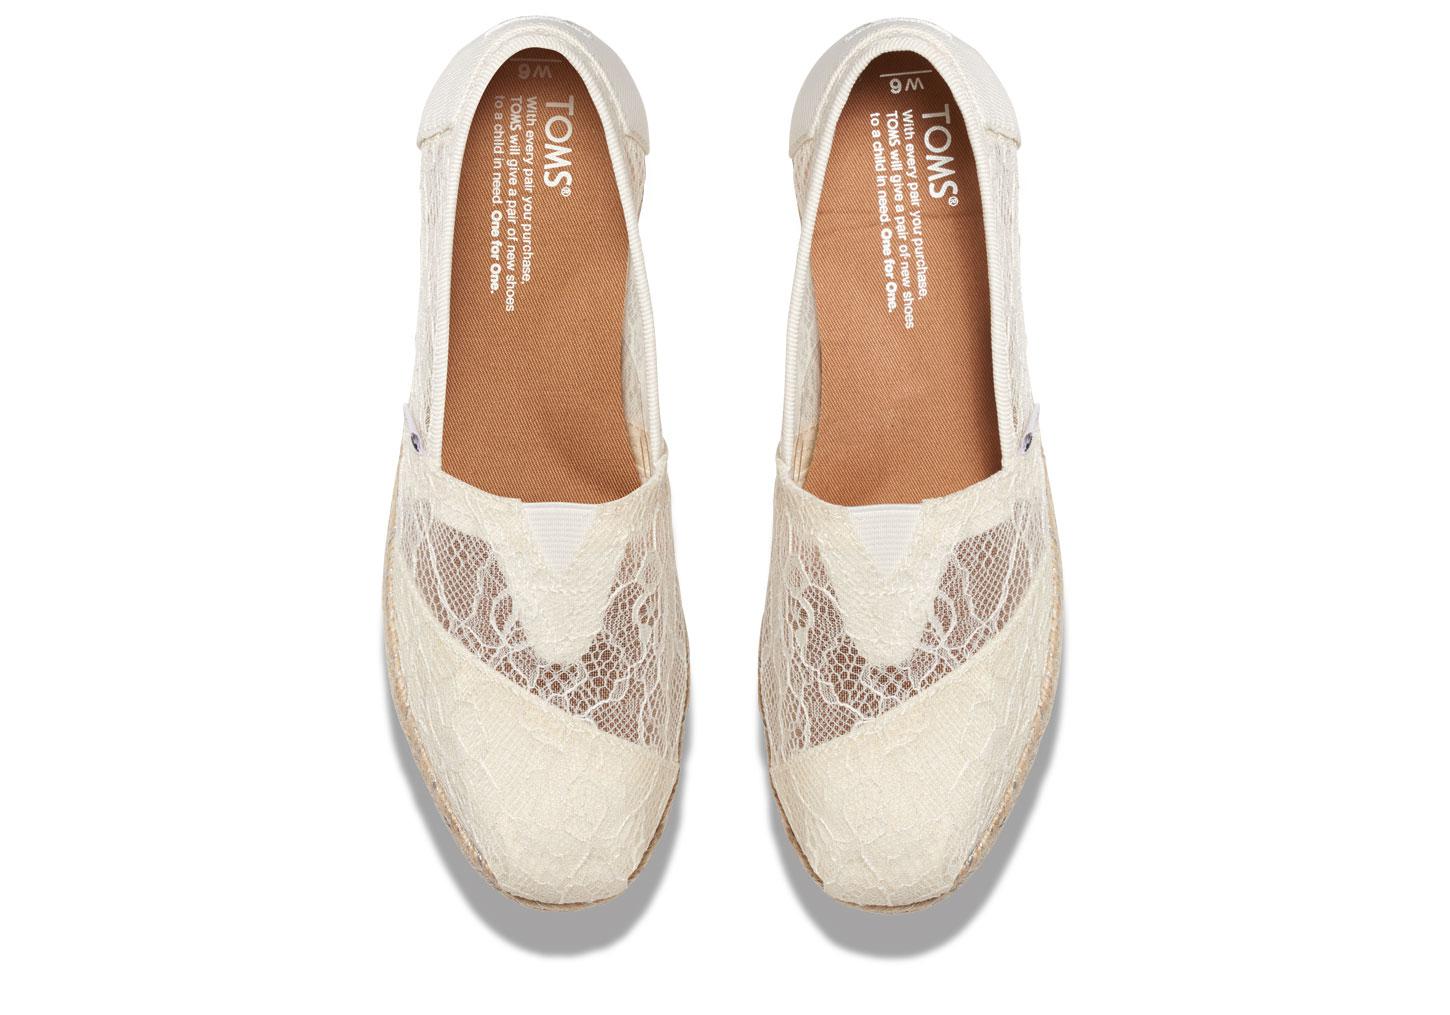 TOMS White Lace Rope Women's Espadrilles - Lyst